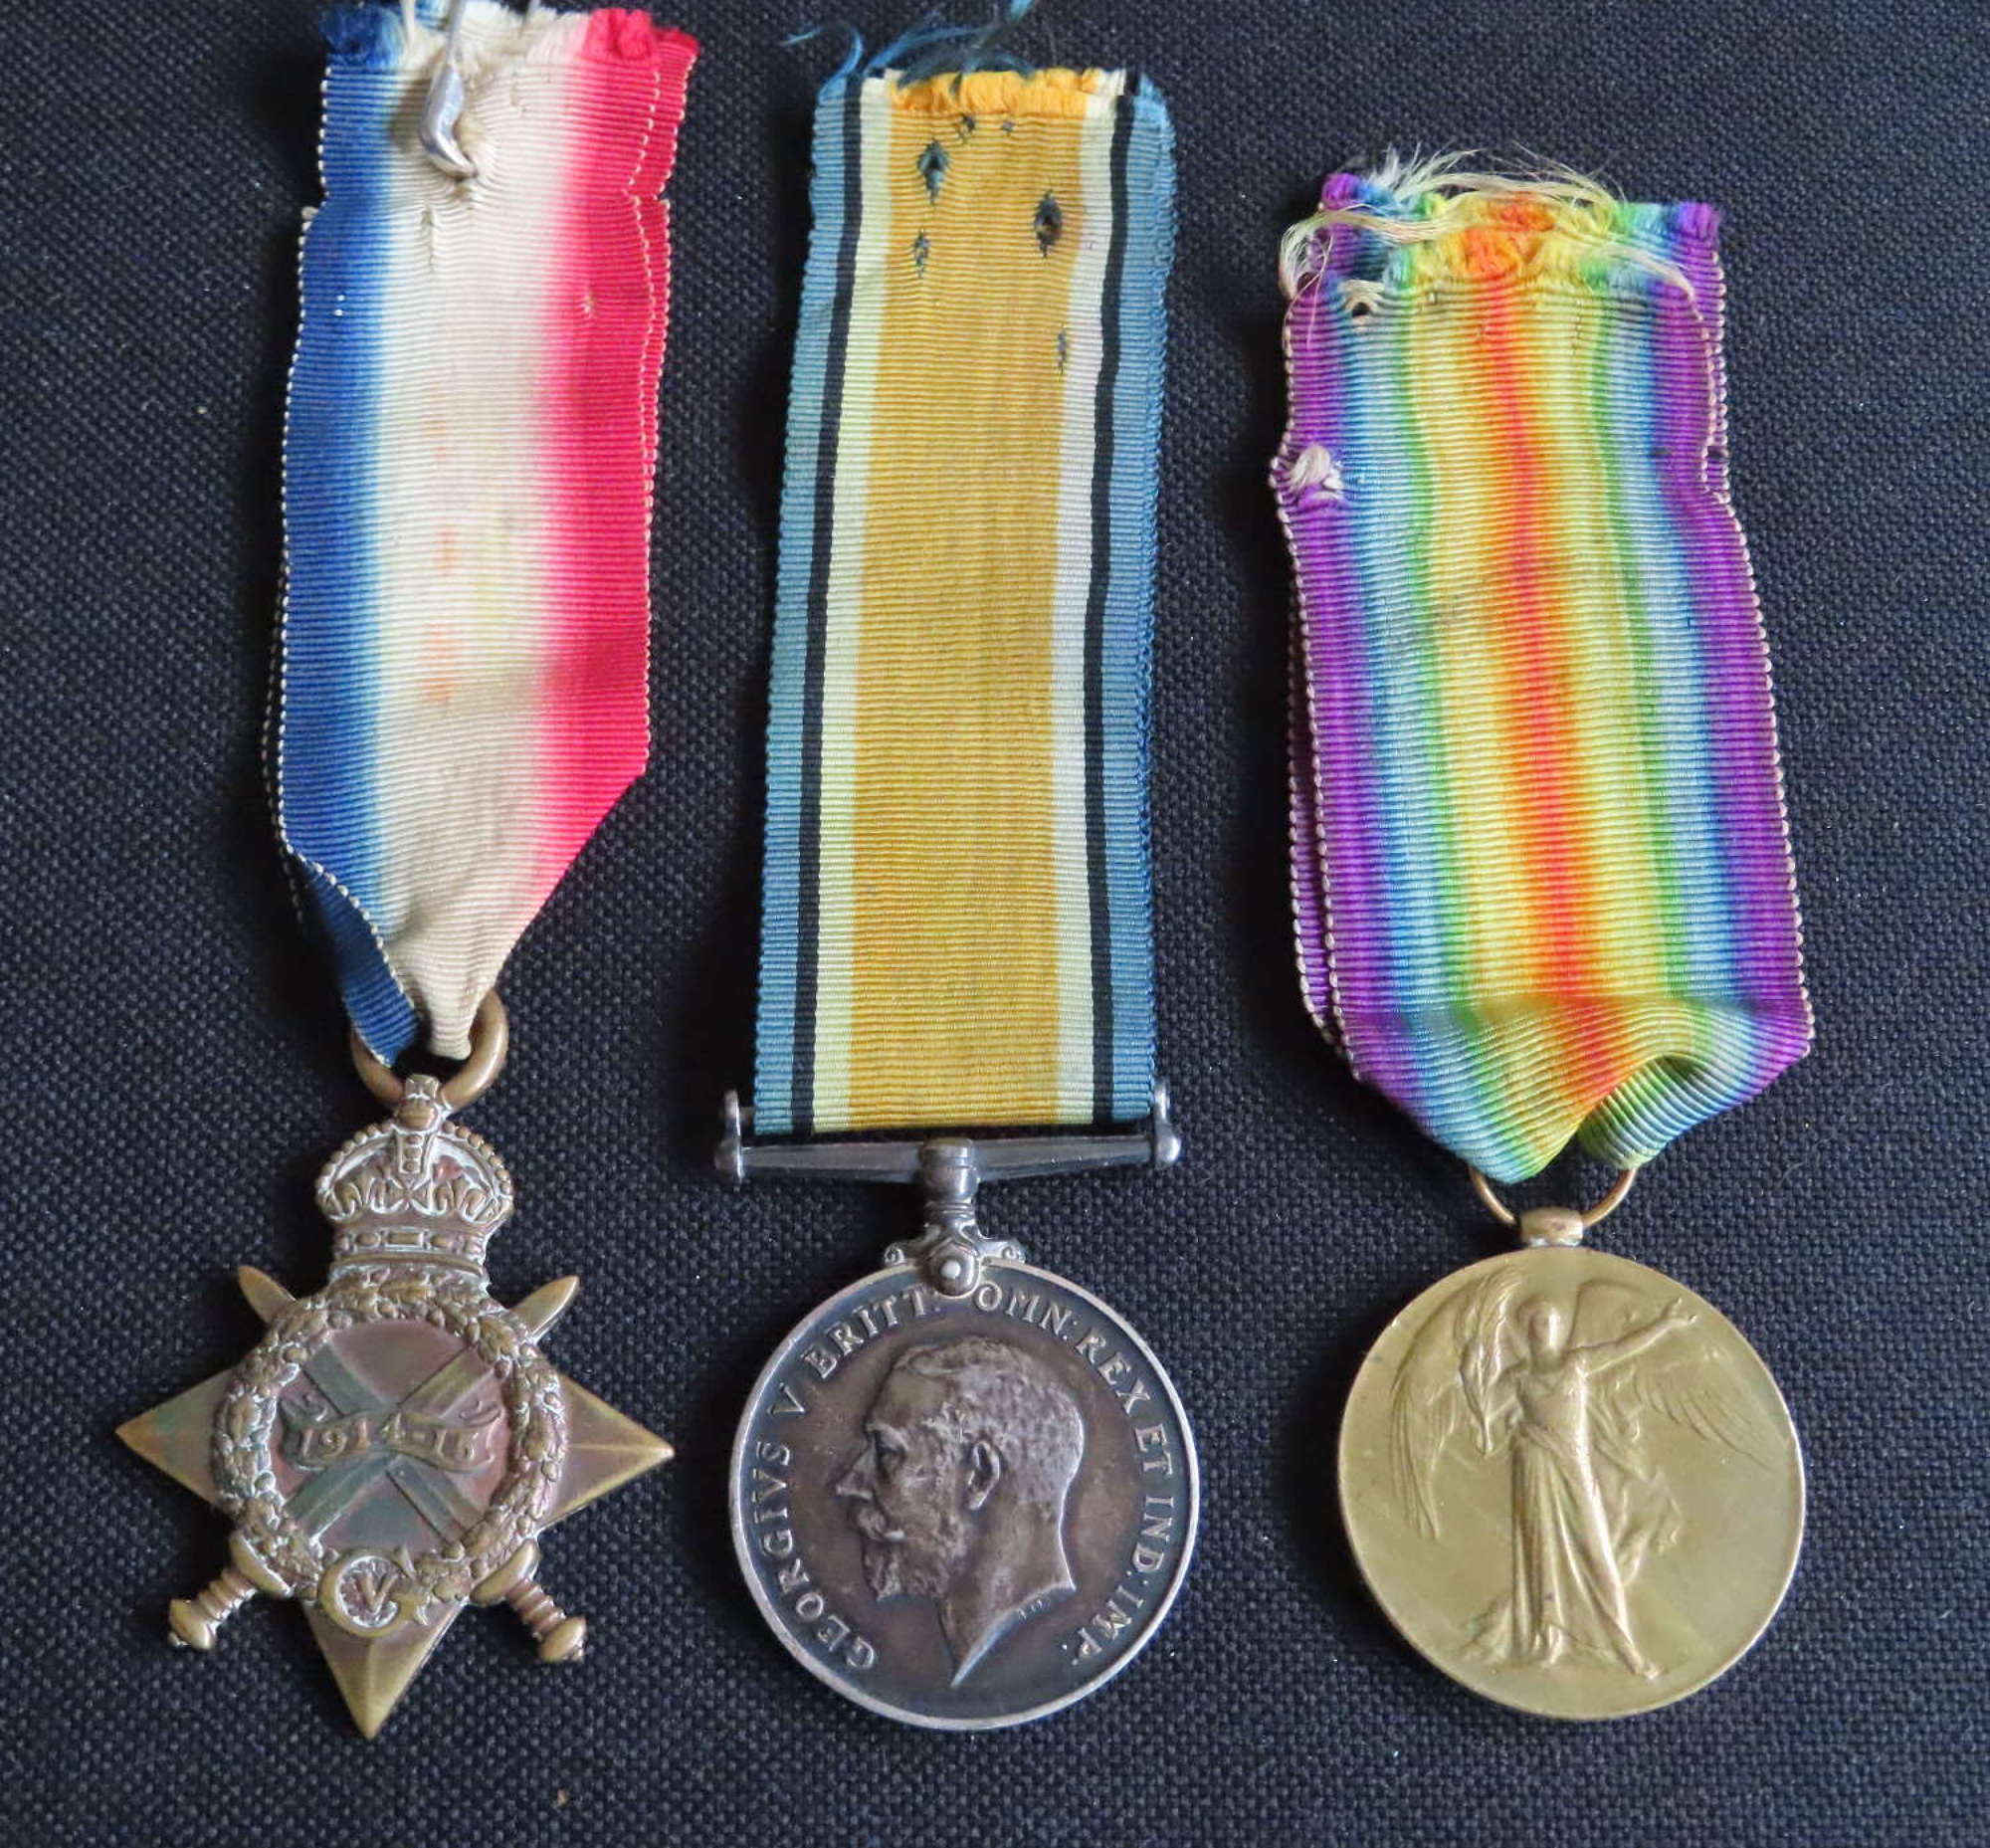 WW1 Casualty 1914/15 Trio of Medals to 21269 Pte J Doggett Worc Regt